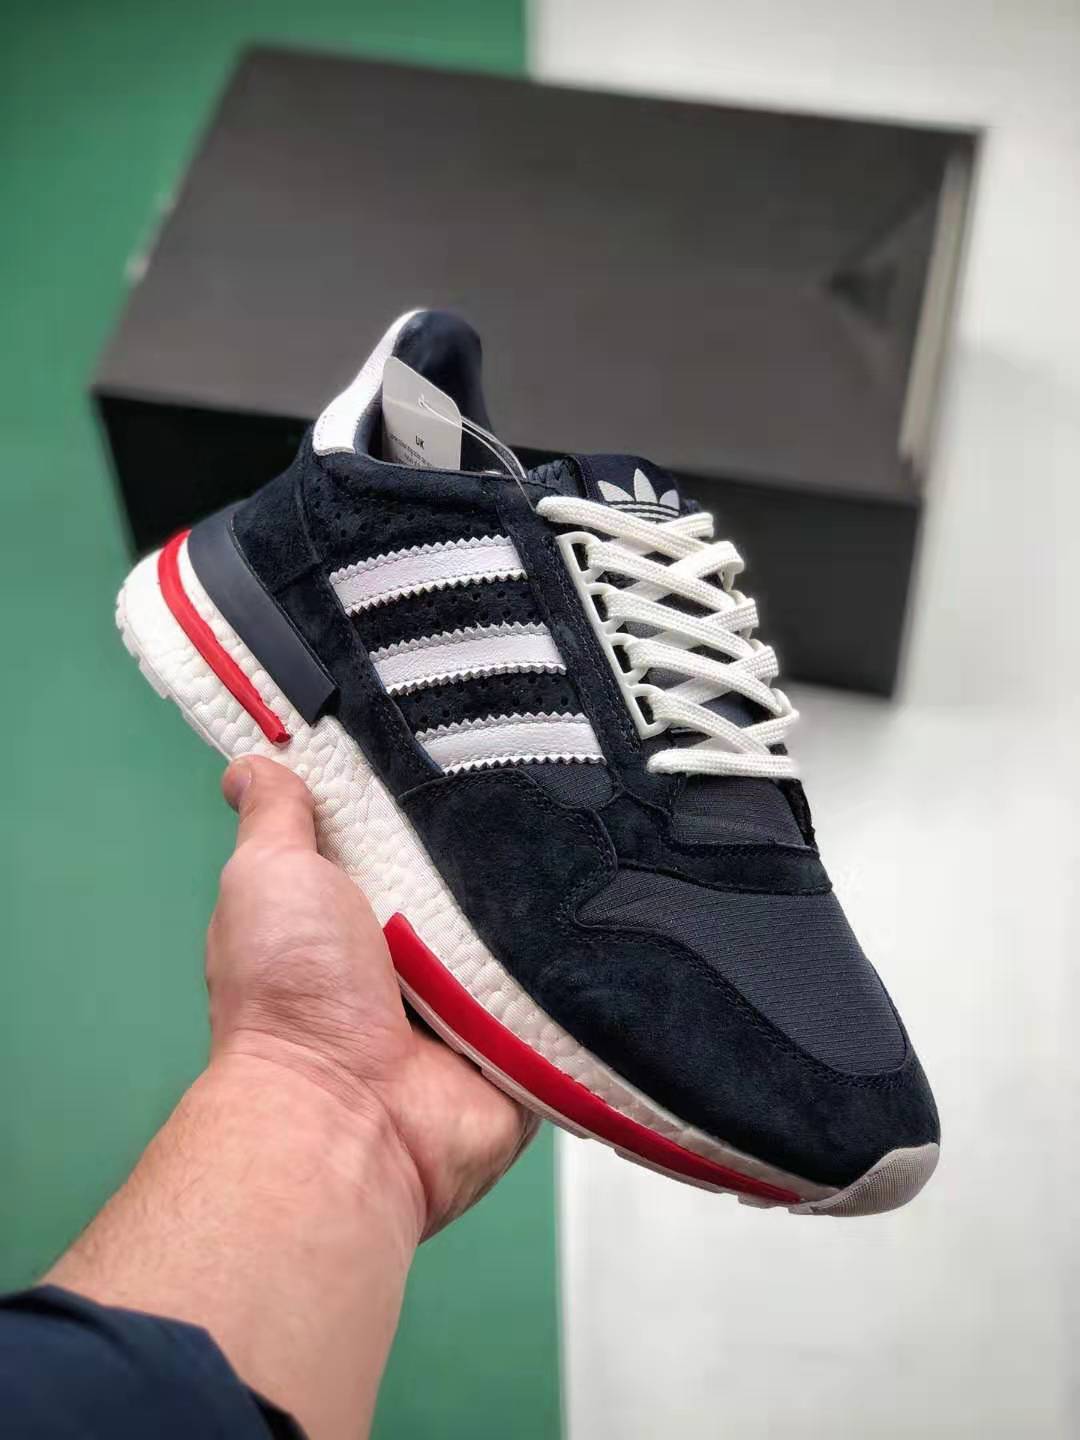 Adidas Clover ZX 500 Cloud White Blue Red Shoes - BB6843